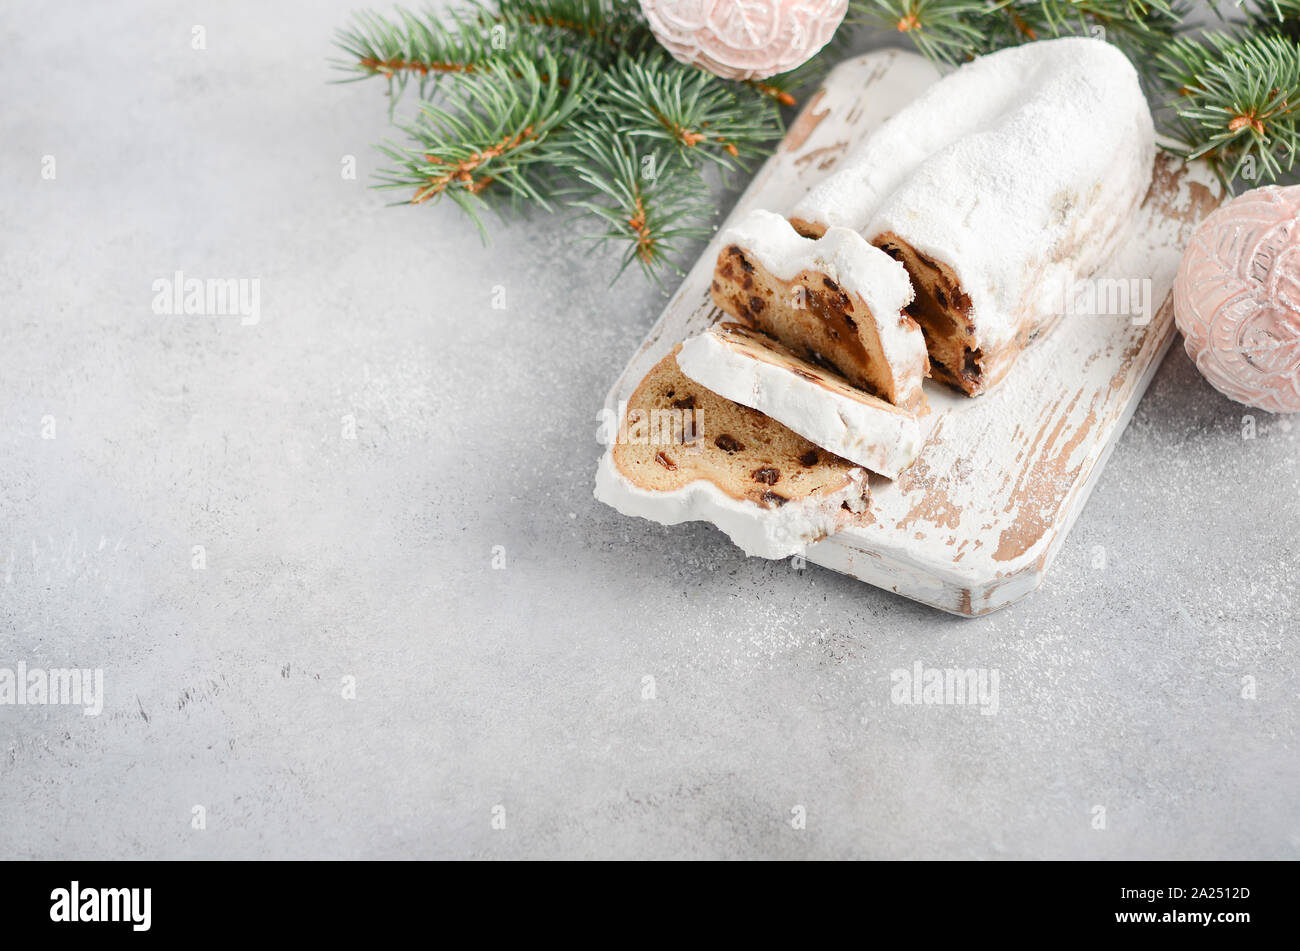 Christmas Stollen. Traditional German, European Festive Dessert. Holiday Concept Decorated with Fir Branches. Stock Photo